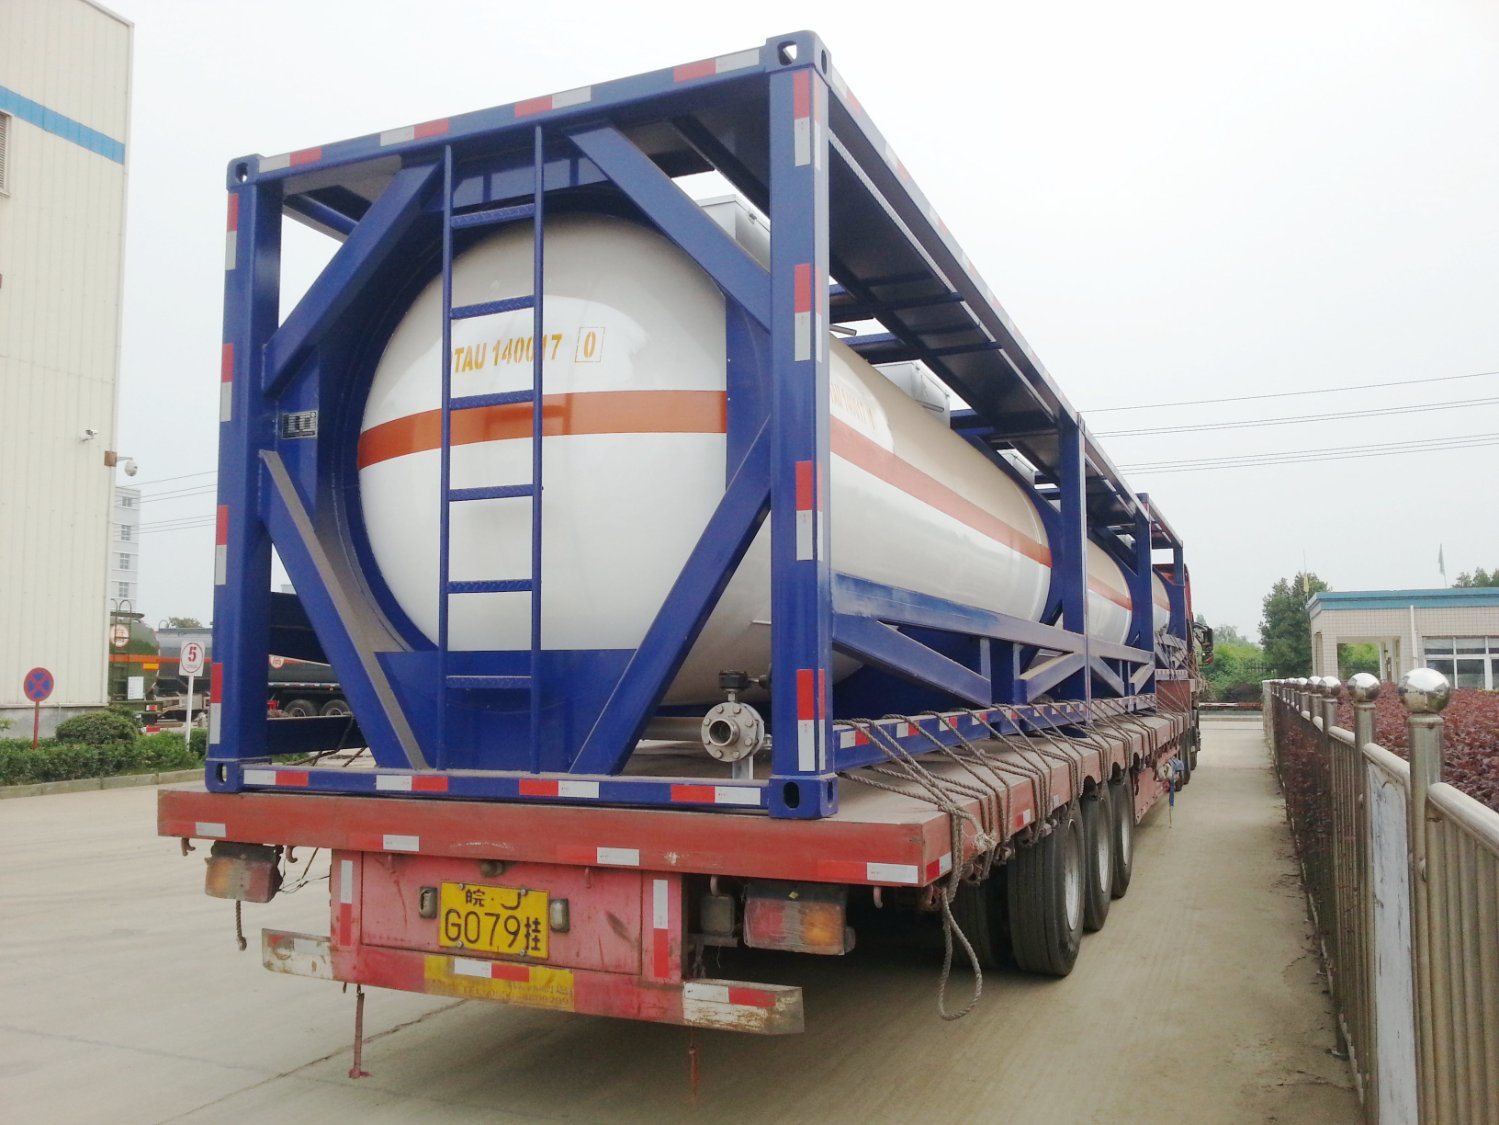  20ft Stainless Steel ISO Tank Container For Edible Oil Liquid Food Alcohol Chili Sauce Transport